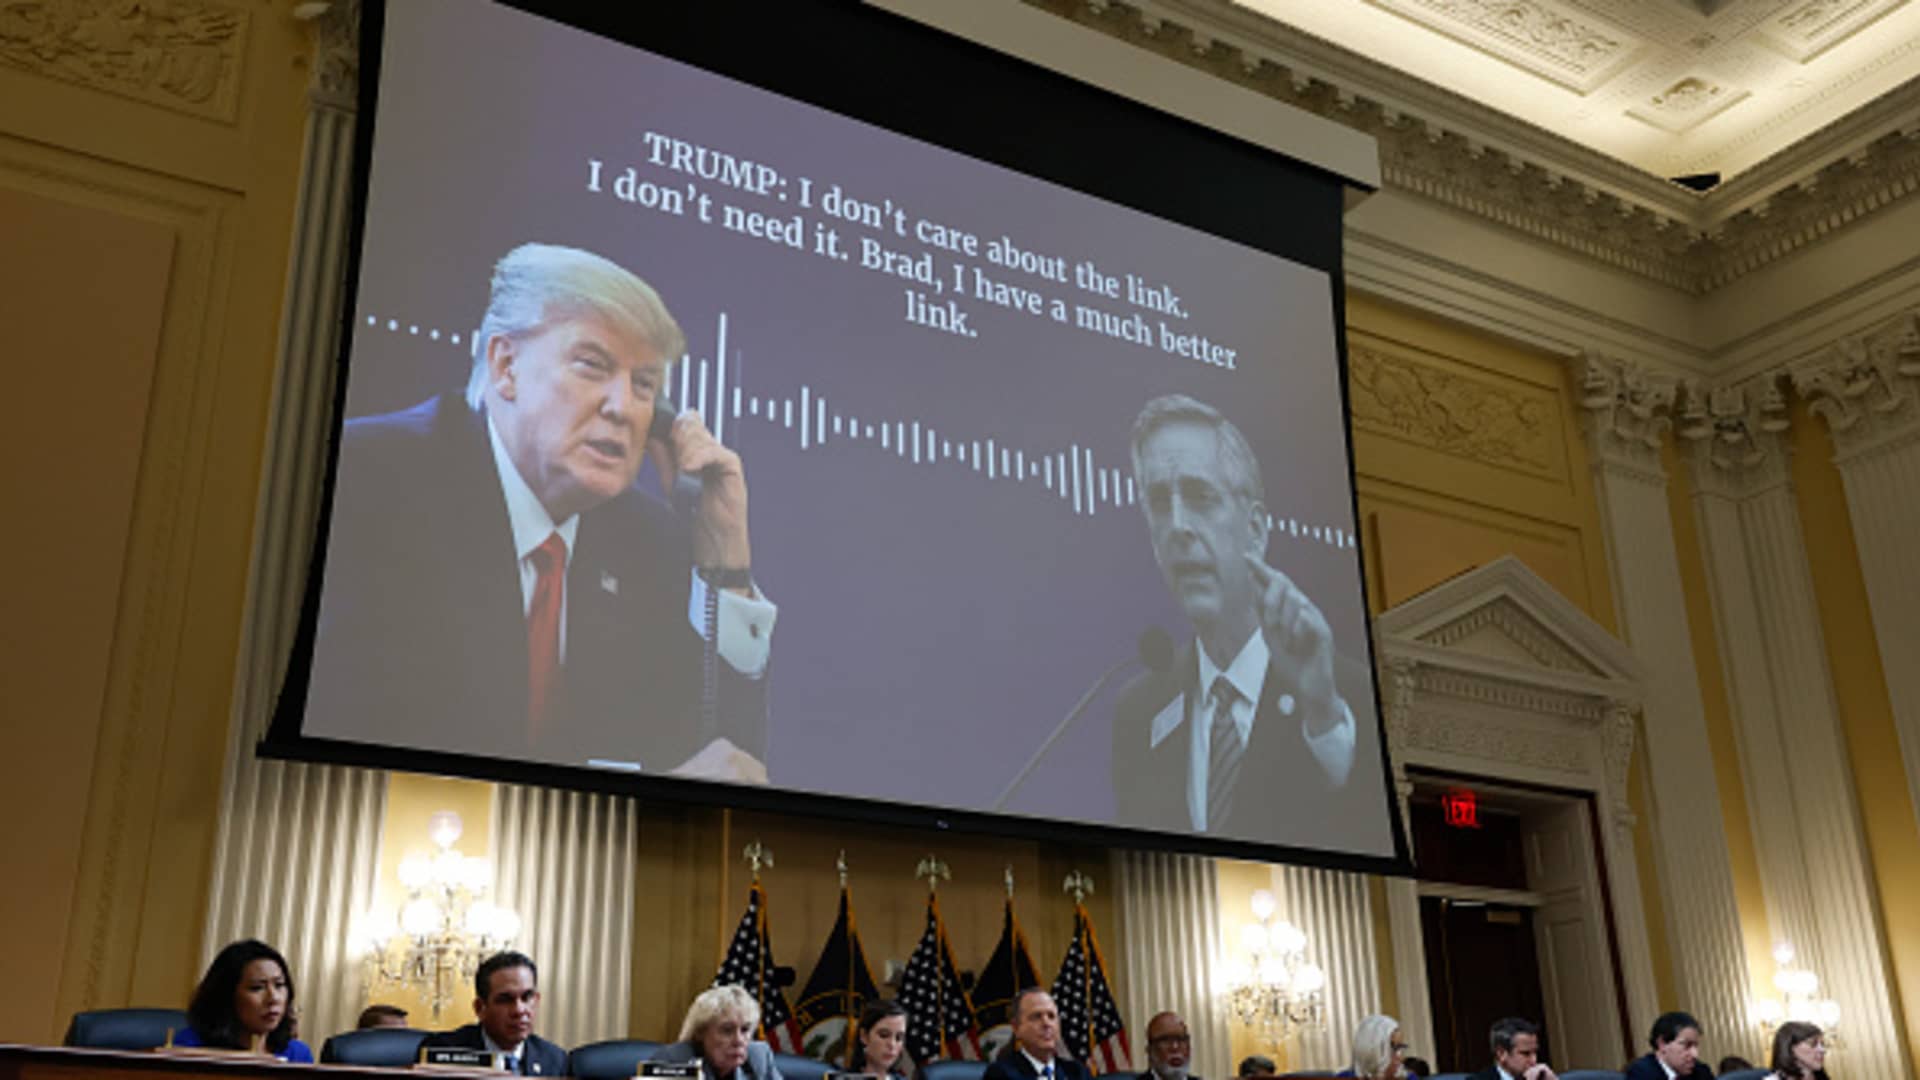 A transcript of a phone call between former U.S. President Donald Trump and Brad Raffensperger, Georgia Secretary of State, appears on a video screen during the fourth hearing on the January 6th investigation in the Cannon House Office Building on June 21, 2022 in Washington, DC.